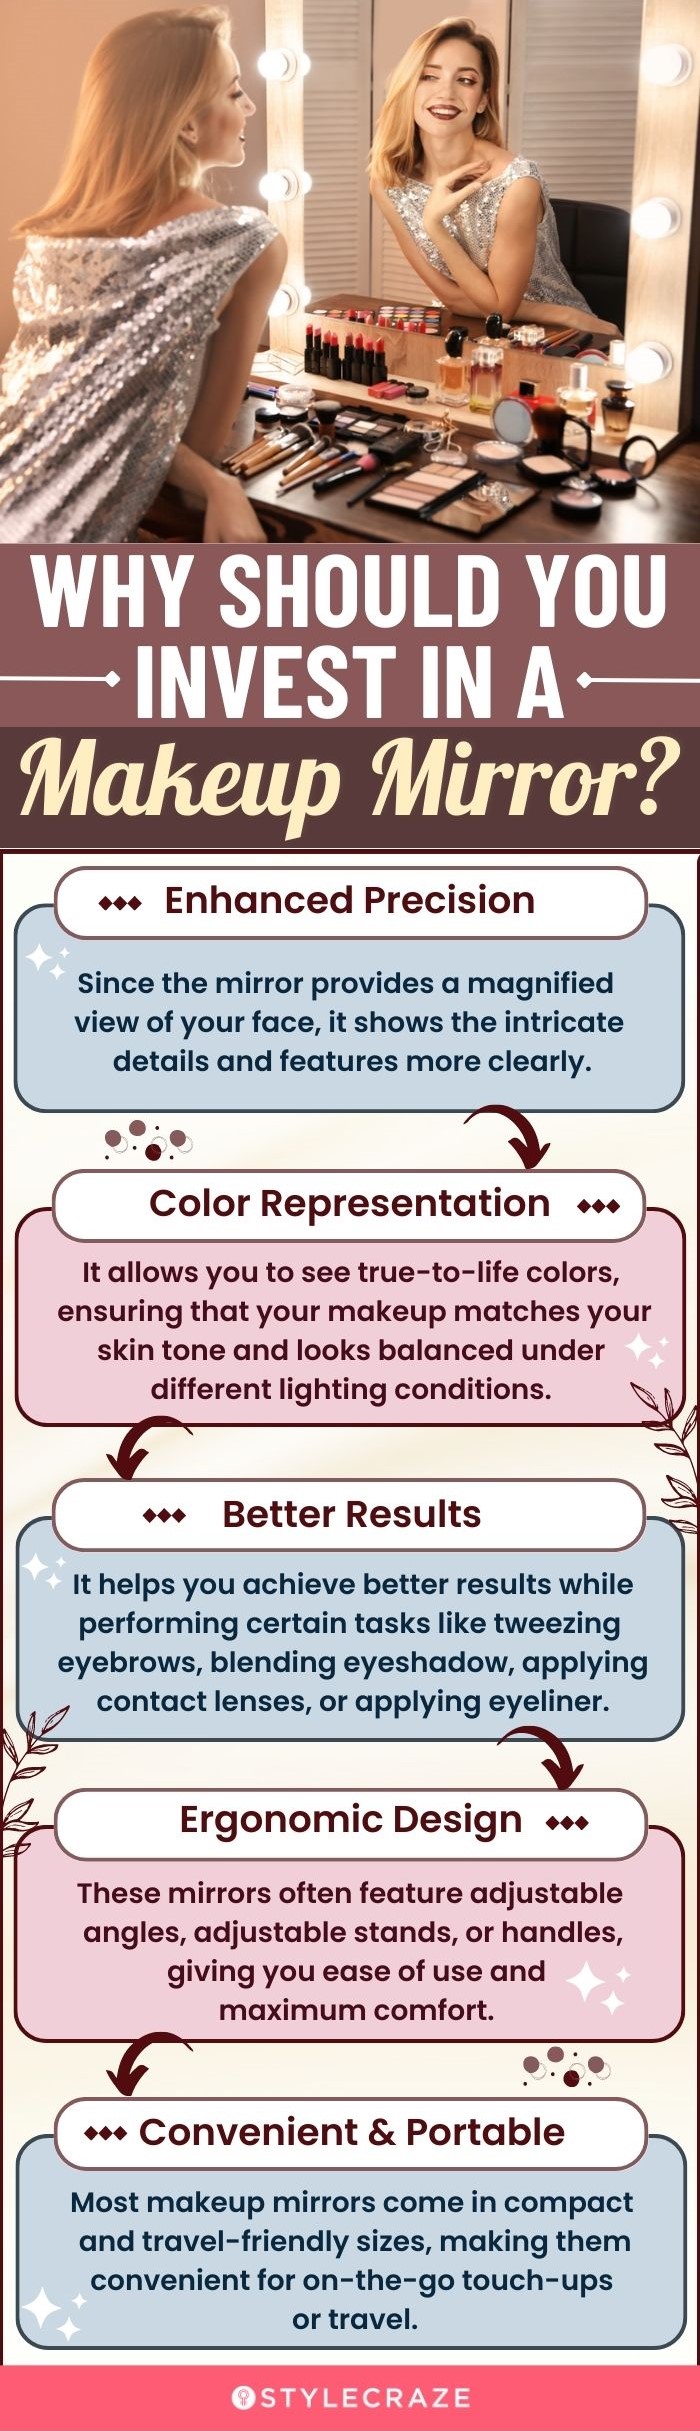 Why Should You Invest In A Makeup Mirror? (infographic)